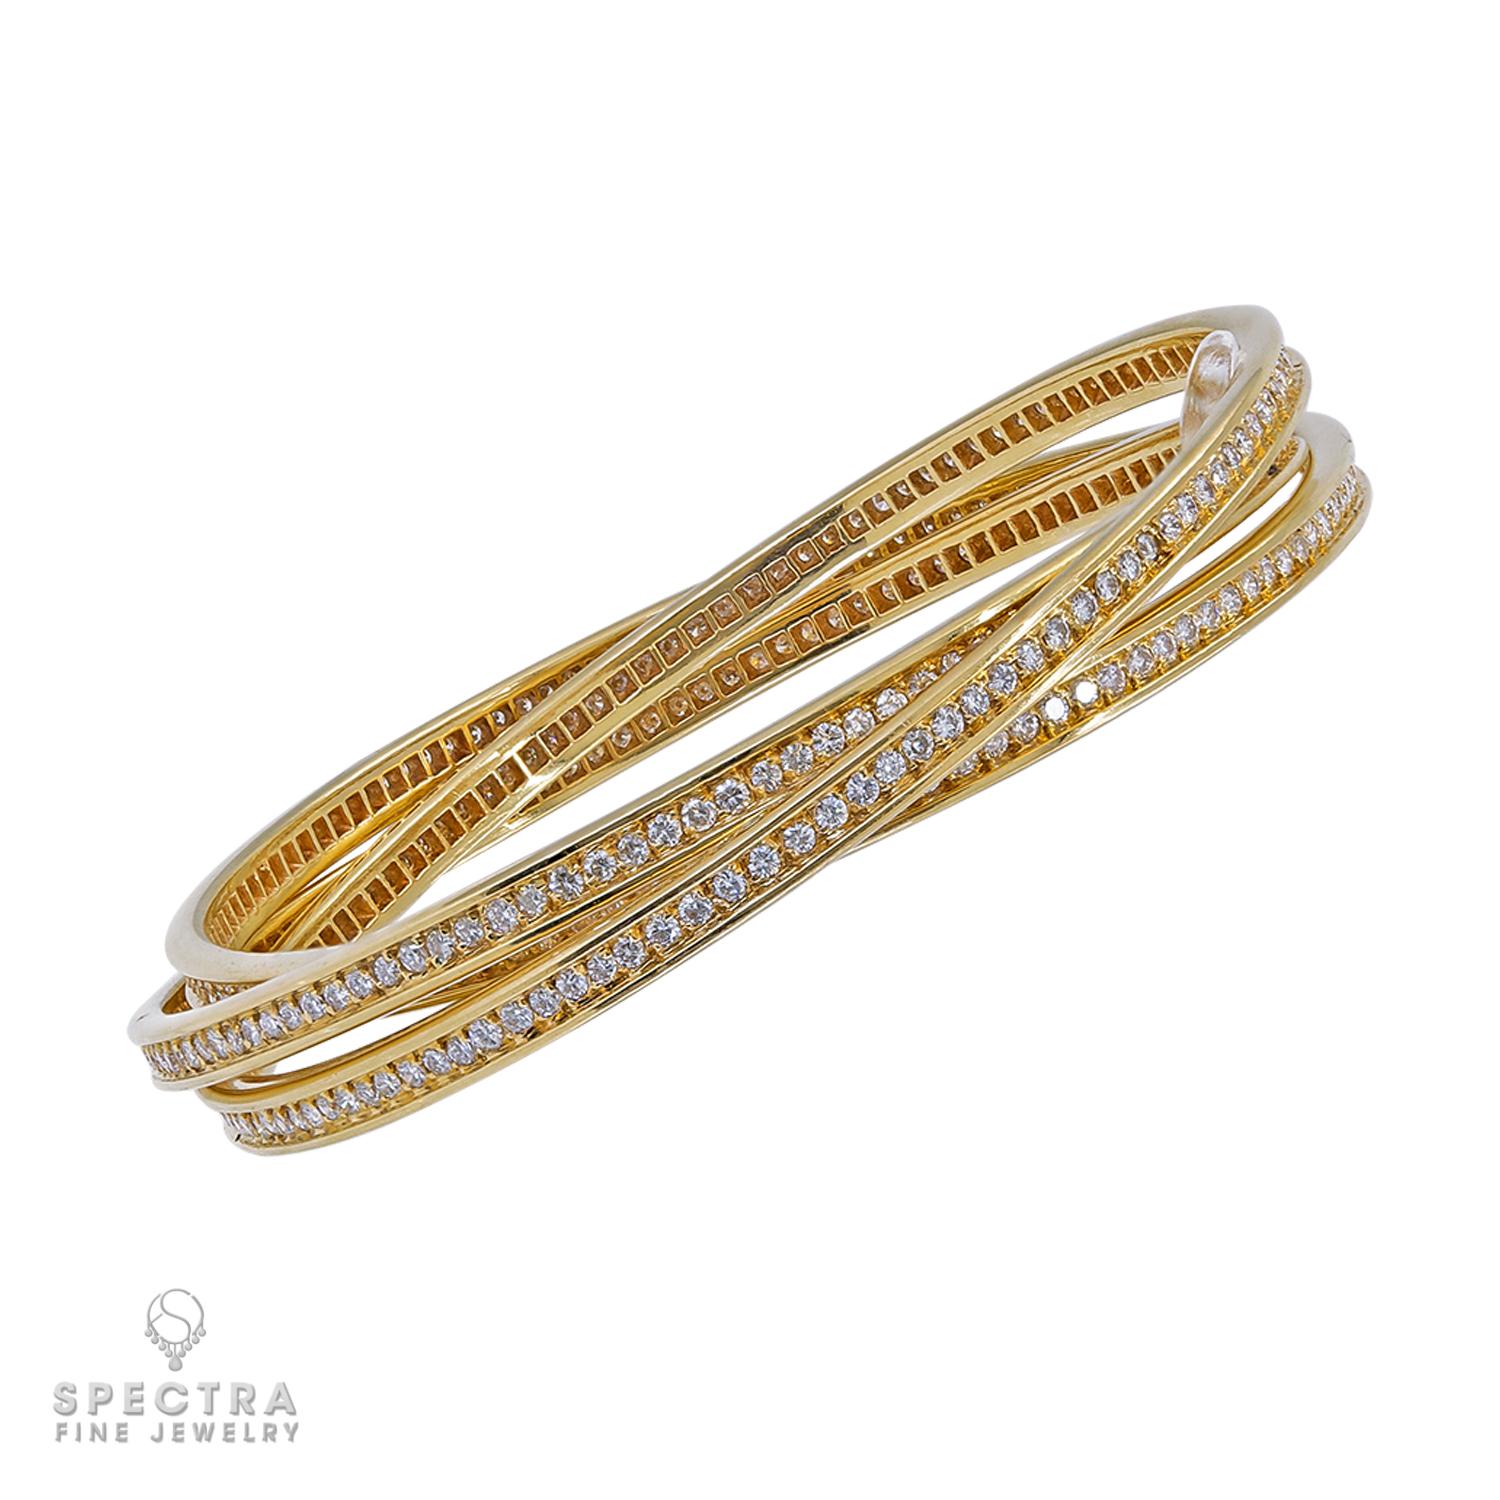 A triple-bangle made by Cartier from the 'Trinity' collection, comprising of 7.62 carats of diamonds, set in 18k yellow gold.
Gross weight 62.10 g.
Stamped Cartier Paris with a serial number.
Circa 2005.
Width 0.01 inch (0.3mm).
Inner circumference